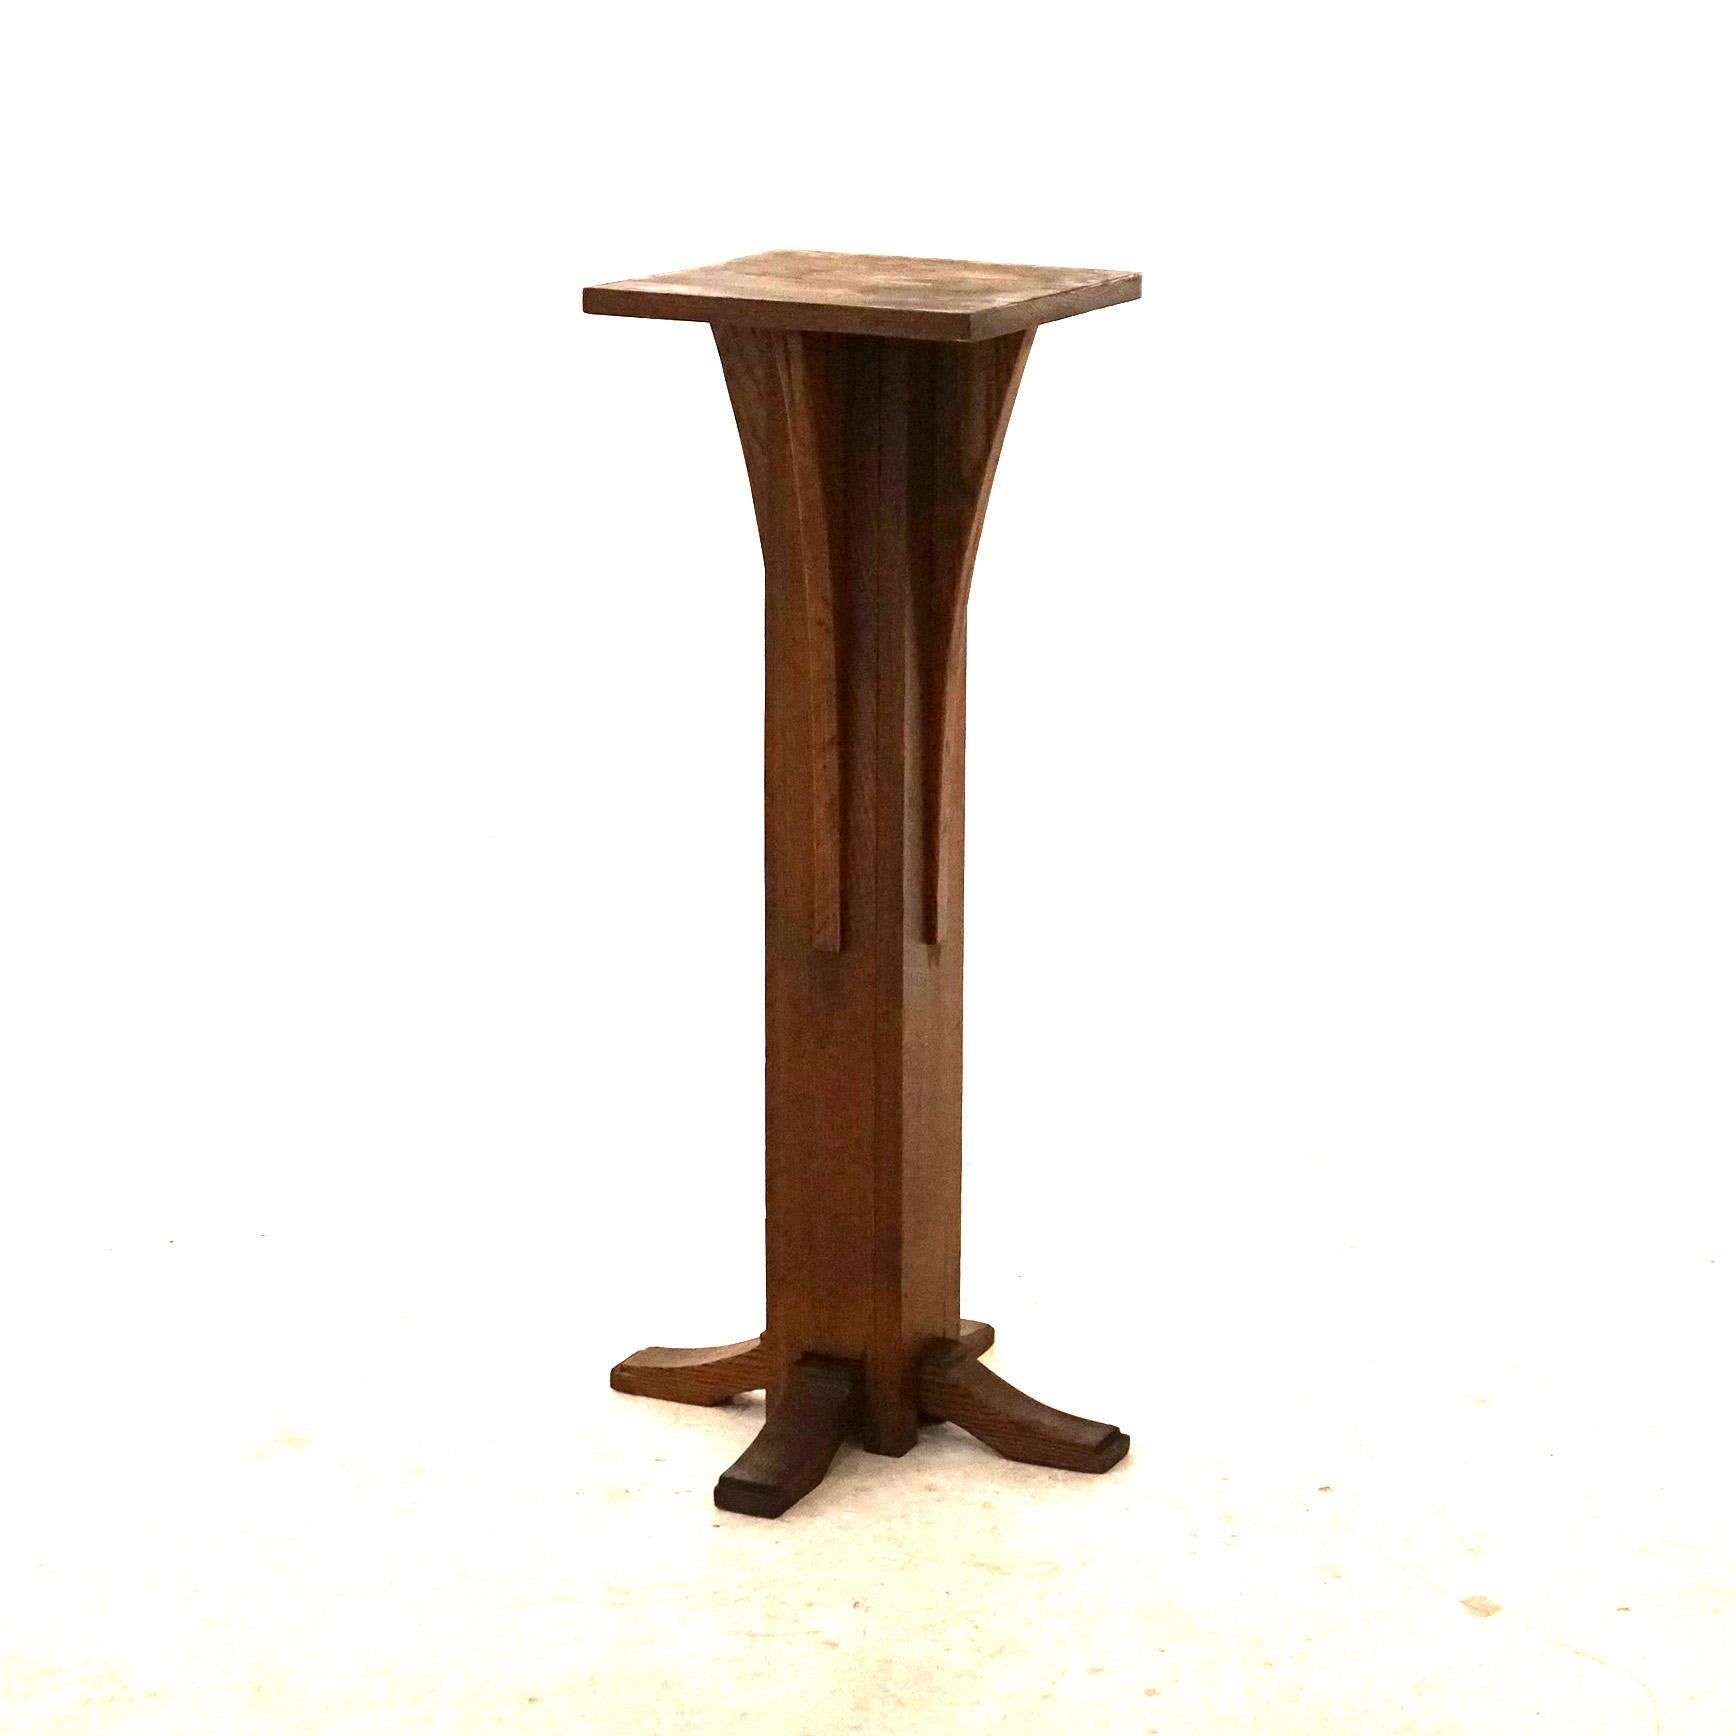 Antique Arts & Crafts plant stand in the manner of L & JG Stickley offers oak construction with square display and four feet, c1910

Measures - 34.5